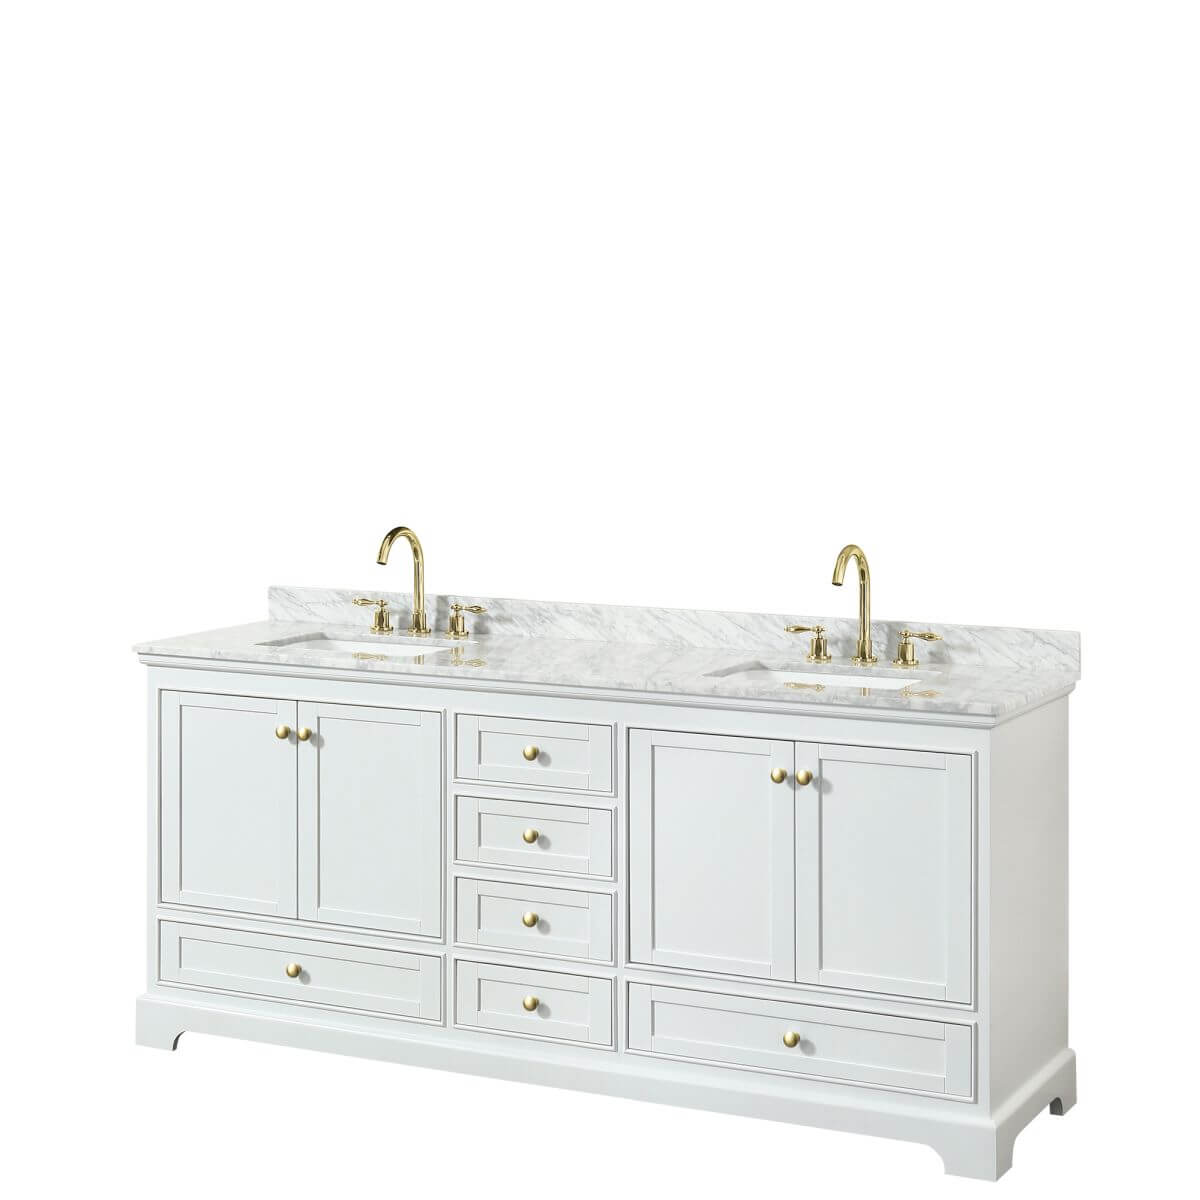 Wyndham Collection Deborah 80 inch Double Bathroom Vanity in White with White Carrara Marble Countertop, Undermount Square Sinks, Brushed Gold Trim and No Mirrors - WCS202080DWGCMUNSMXX